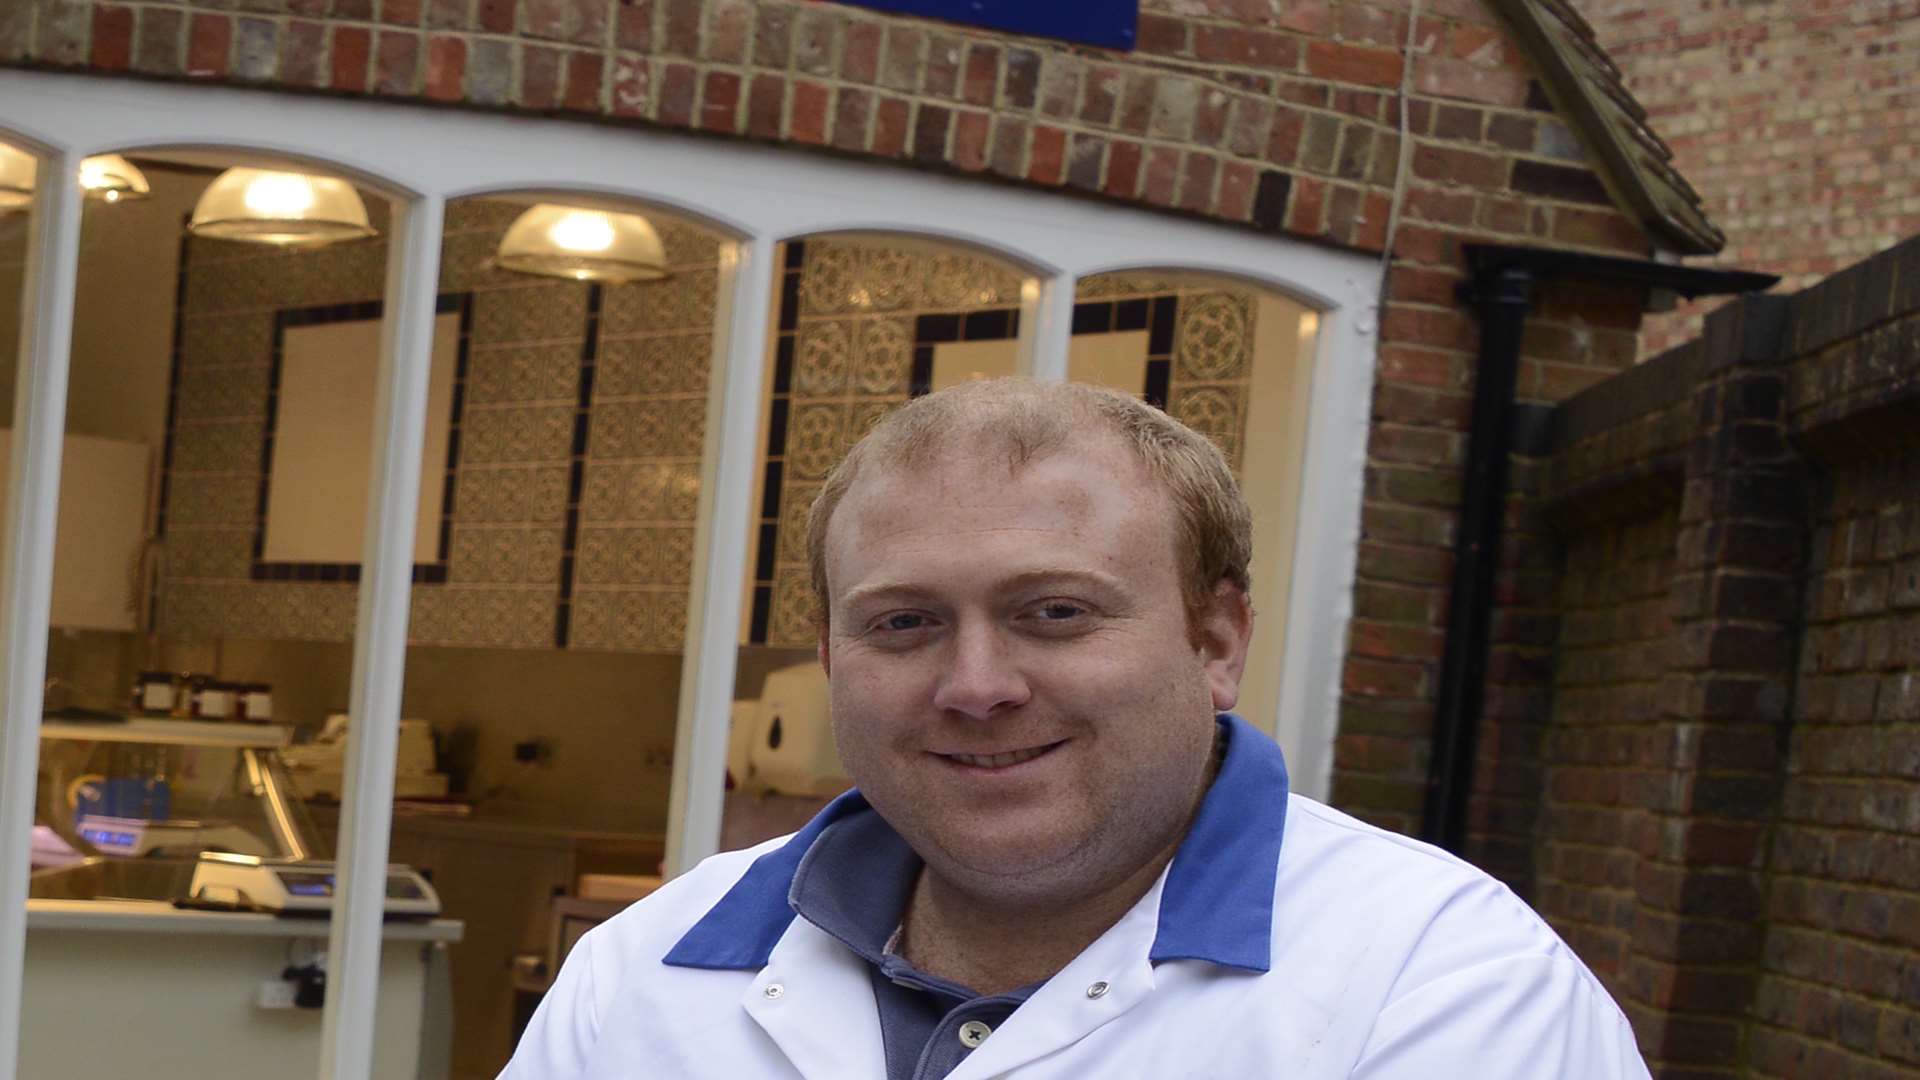 Butcher David "Dazy" Saunders, 34, who died on Christmas Day had taken a fatal amount of cocaine